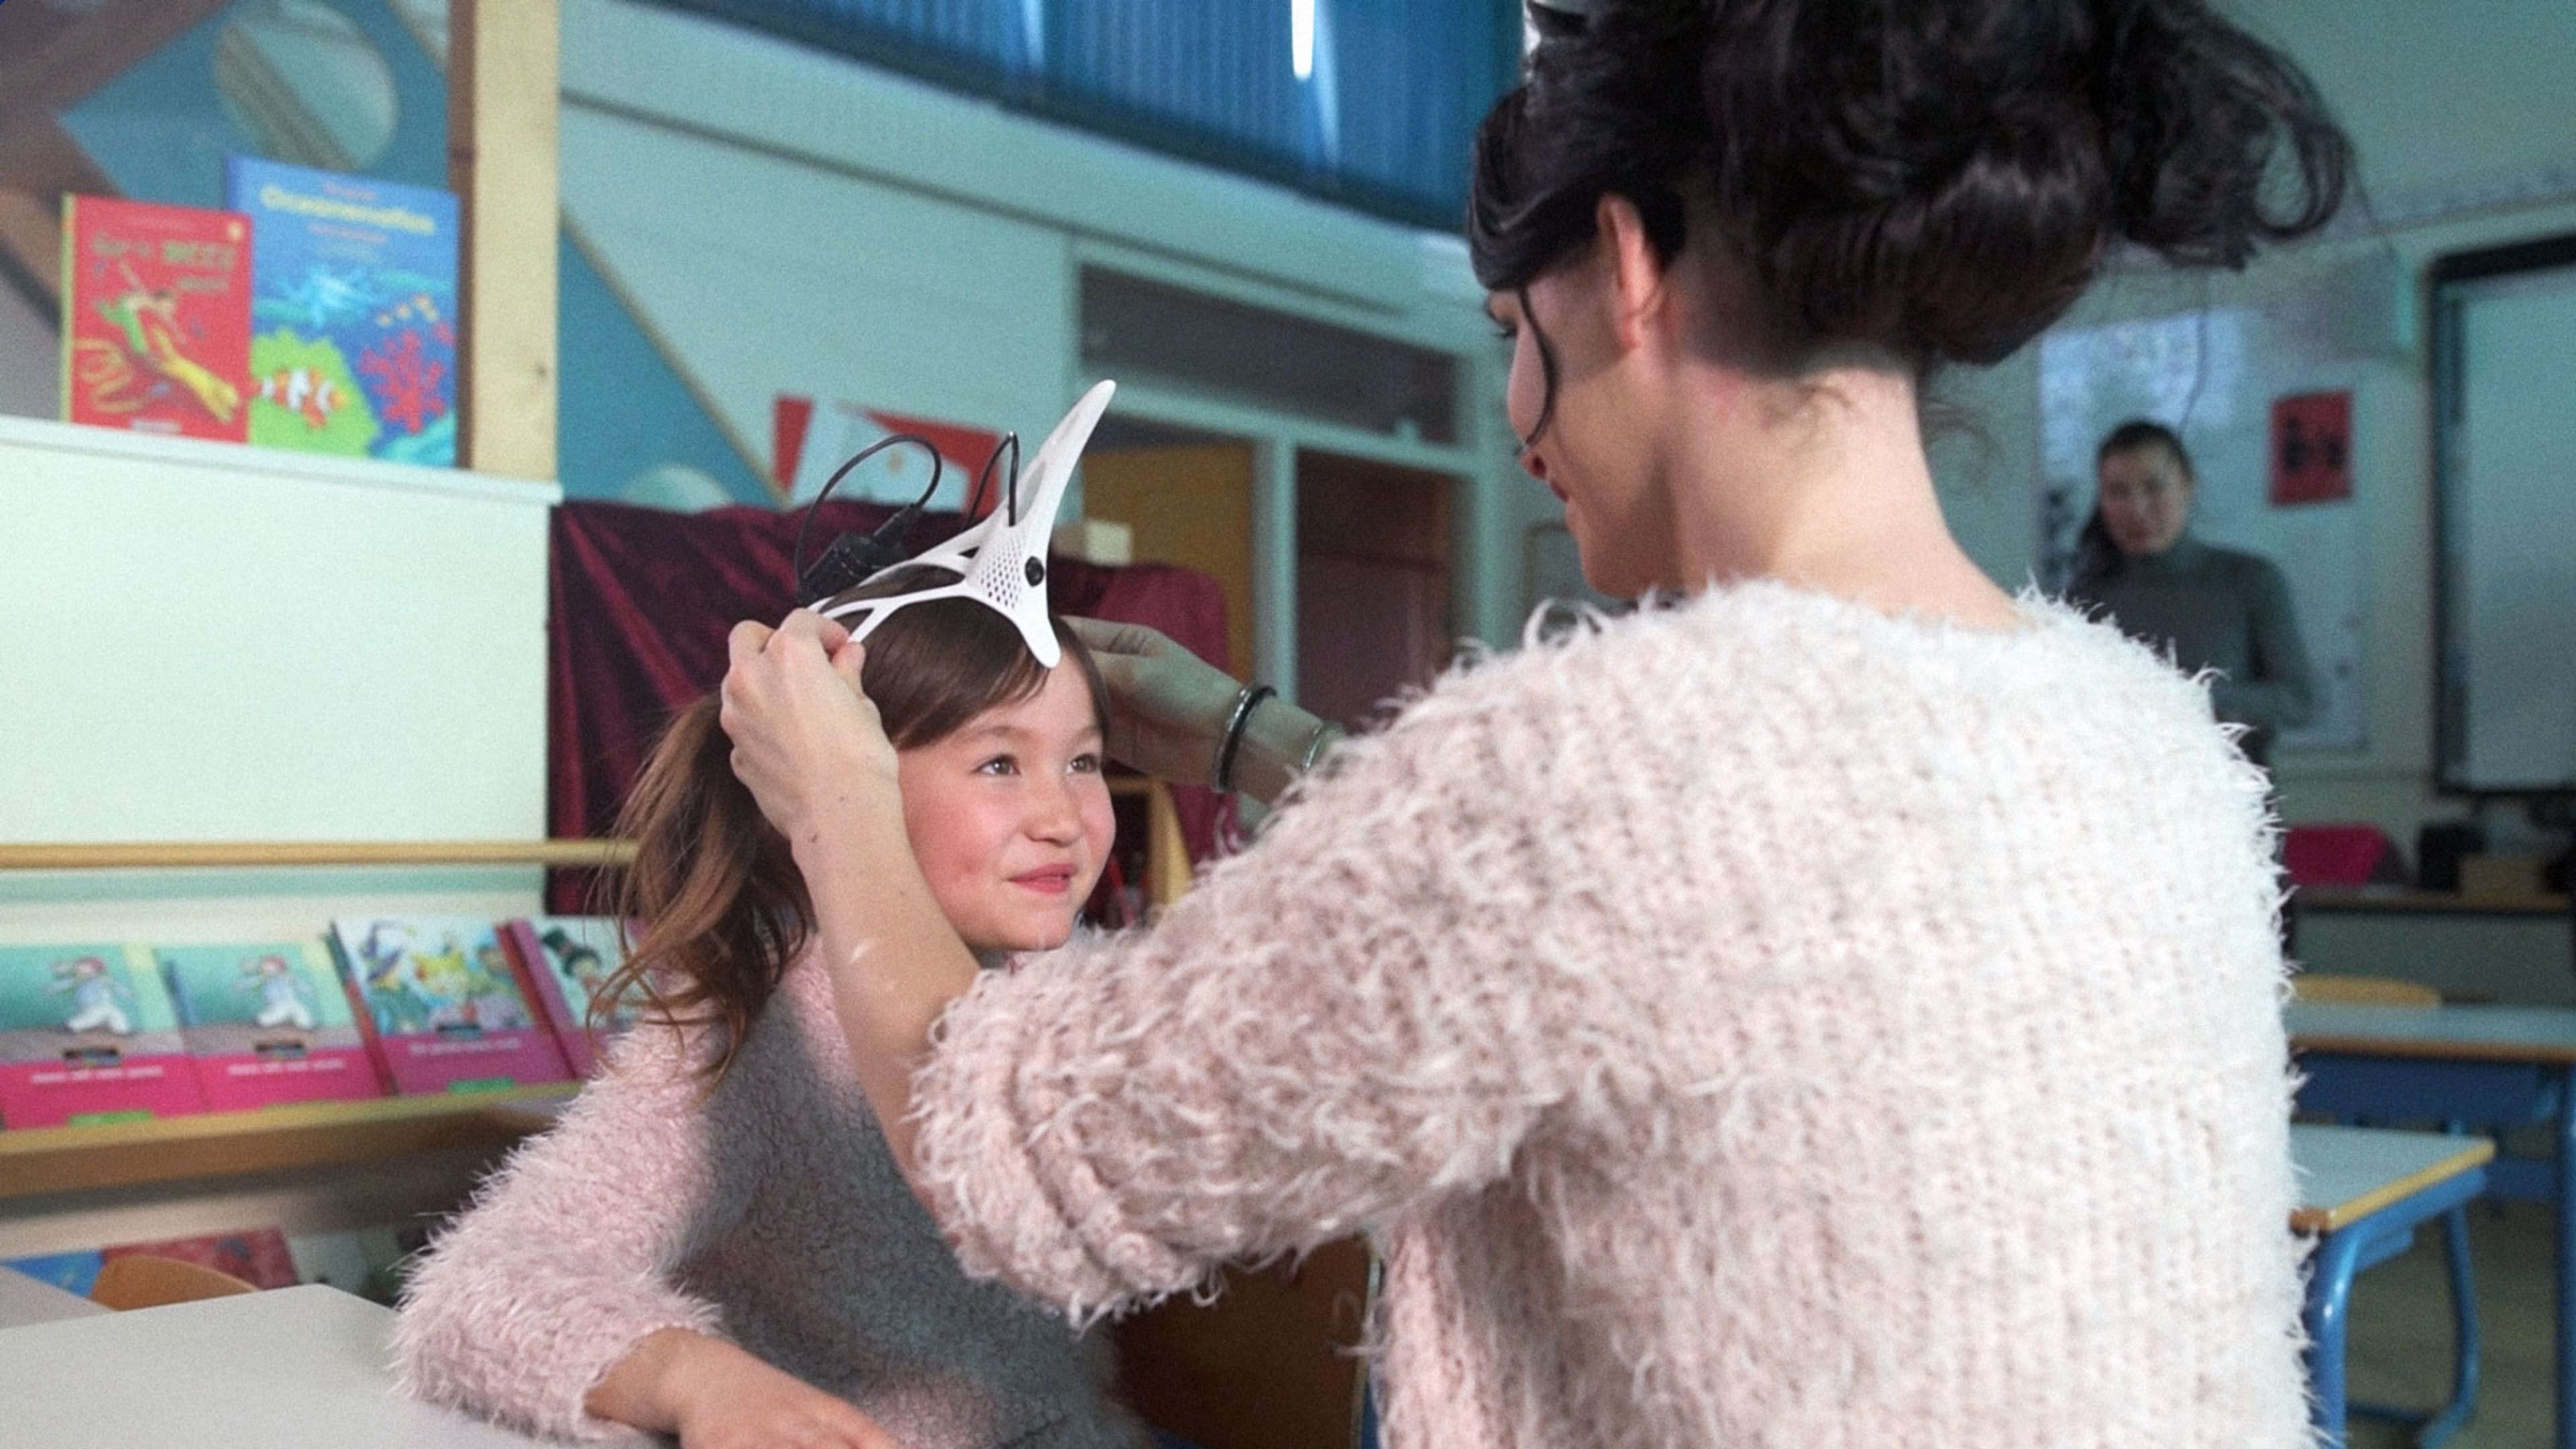 This magical unicorn horn is actually a wearable device for kids with ADHD